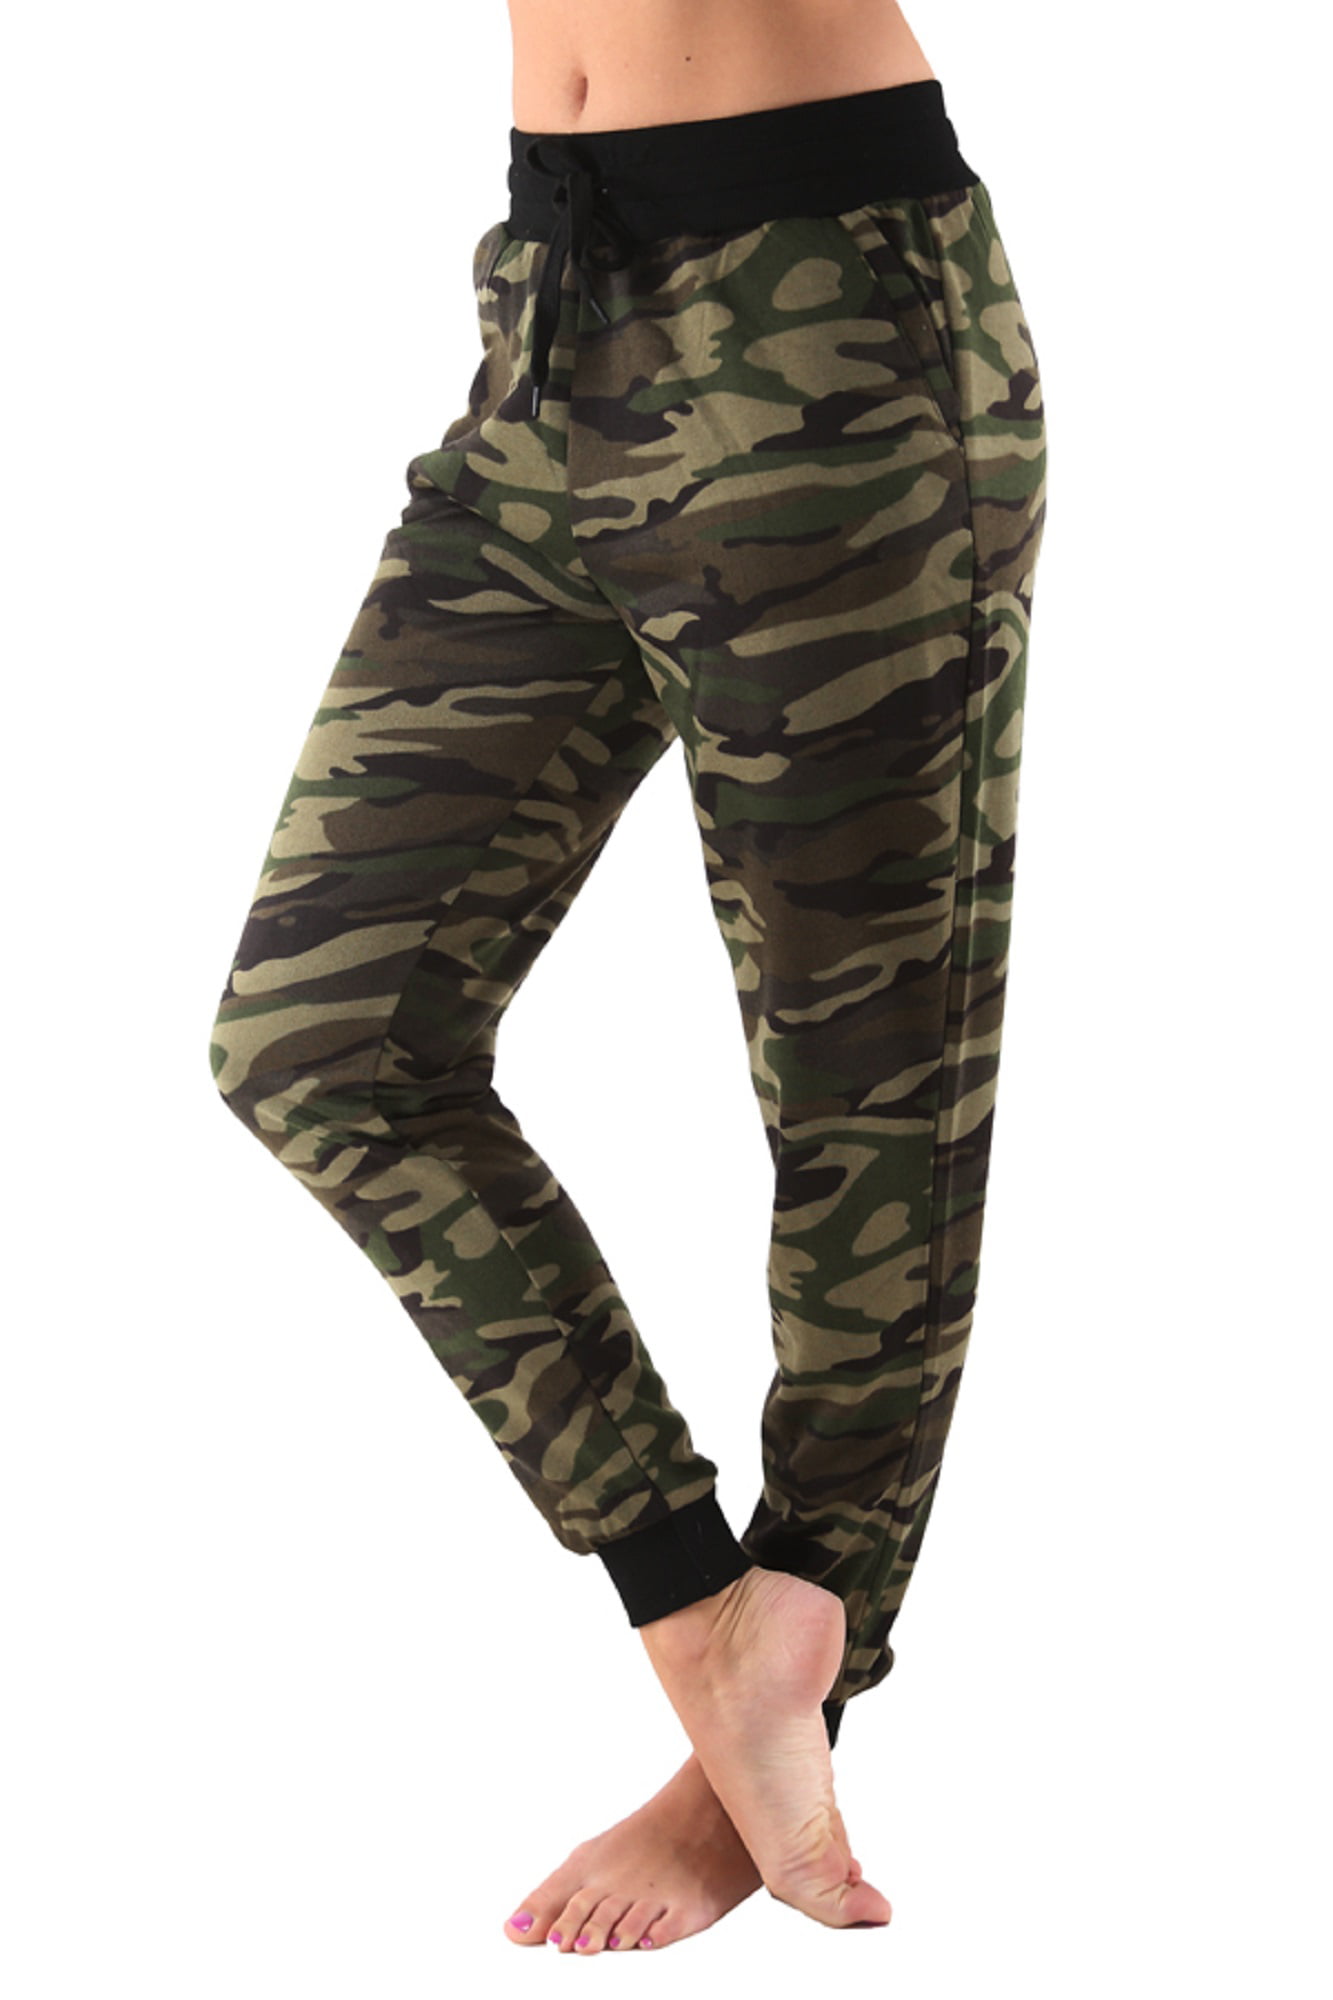 TD Collections Woman's Camo Green Army Pants, Olive Medium Size ...